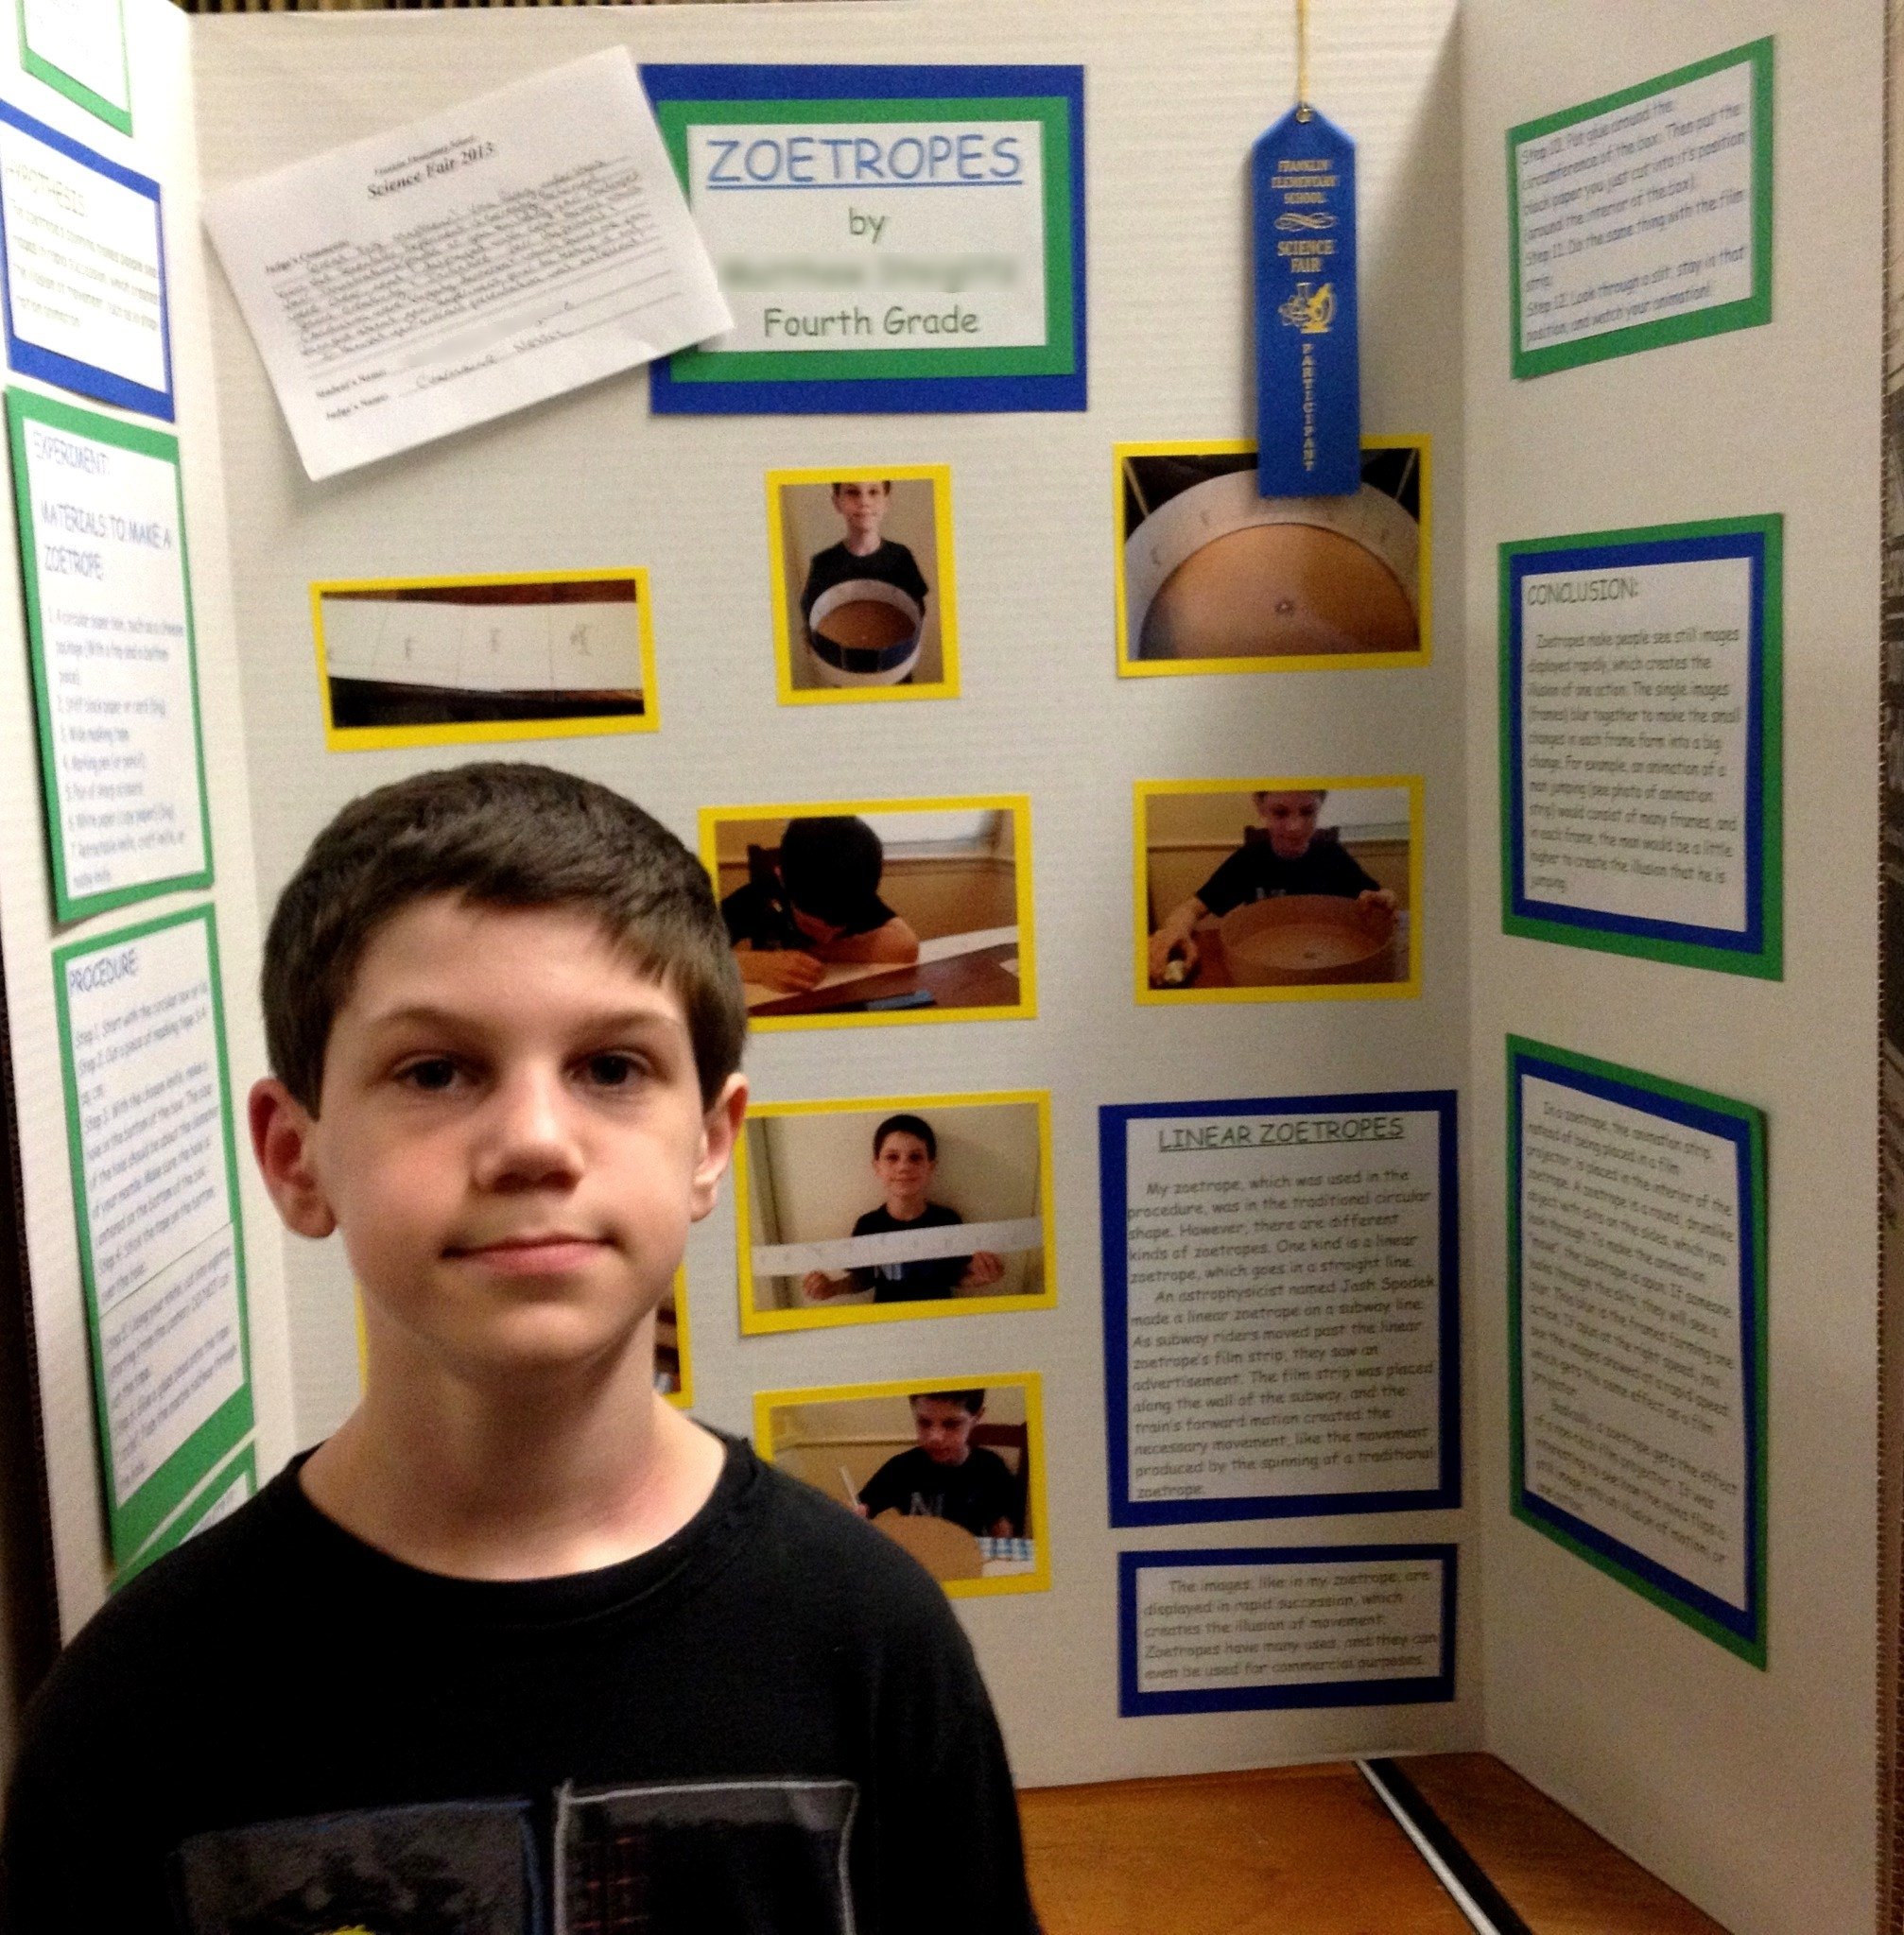 10 Wonderful Science Fair Projects Ideas For 4Th Grade zoetropes in a fourth grade science fair joshua spodek 6 2022